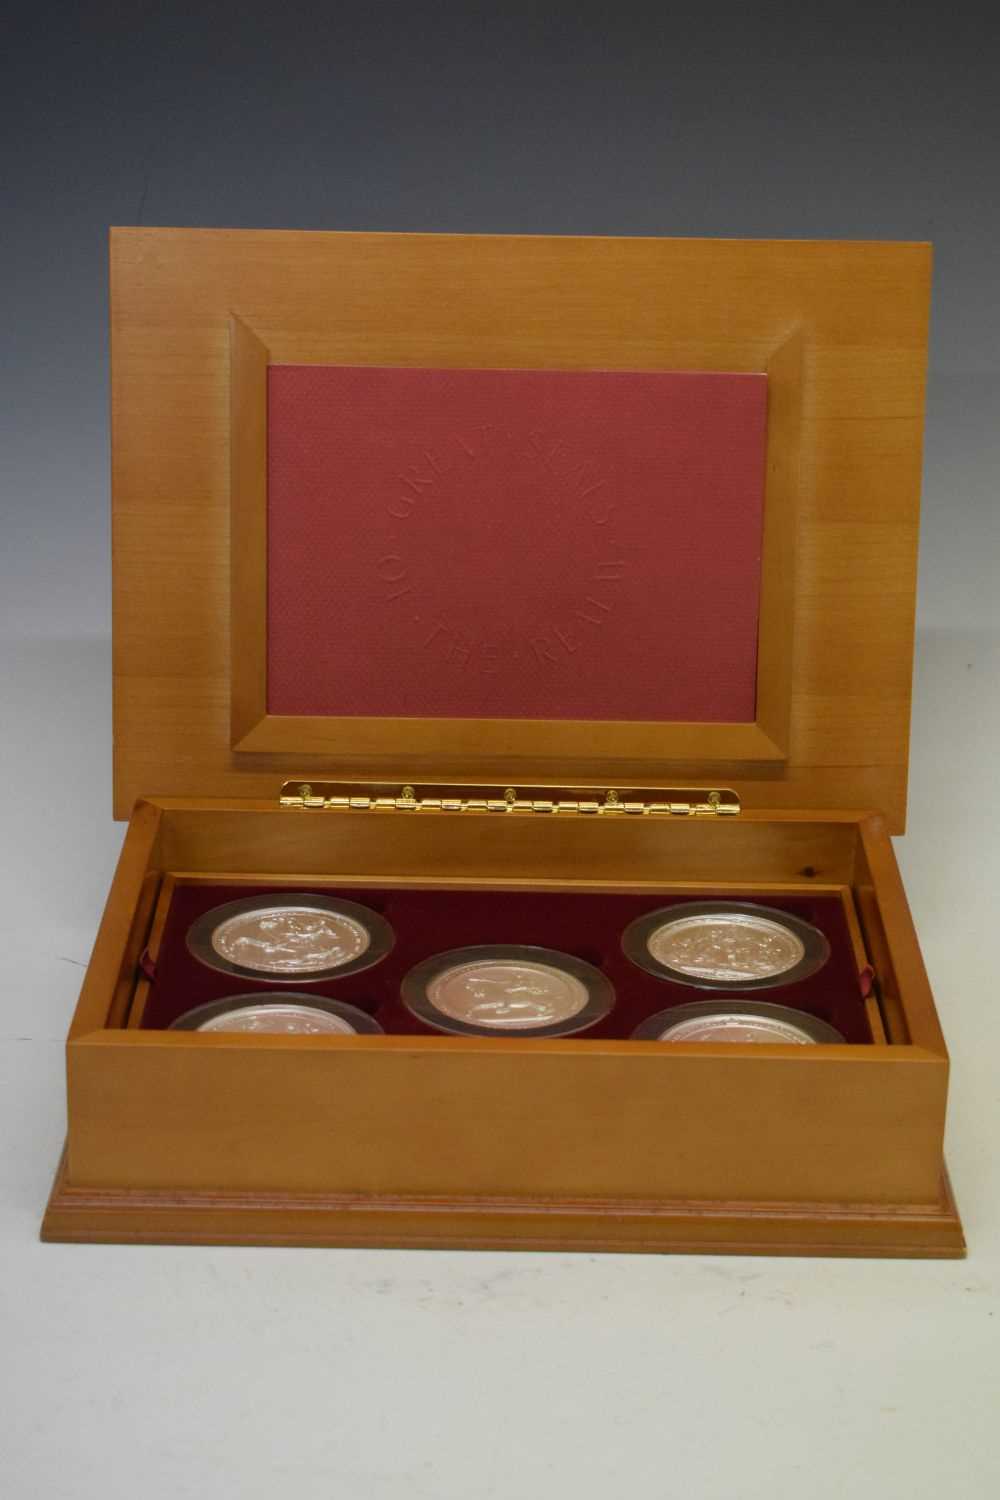 Royal Mint - Great Seals of the Realm 'Nineteenth Century' silver five medallion set - Image 4 of 12